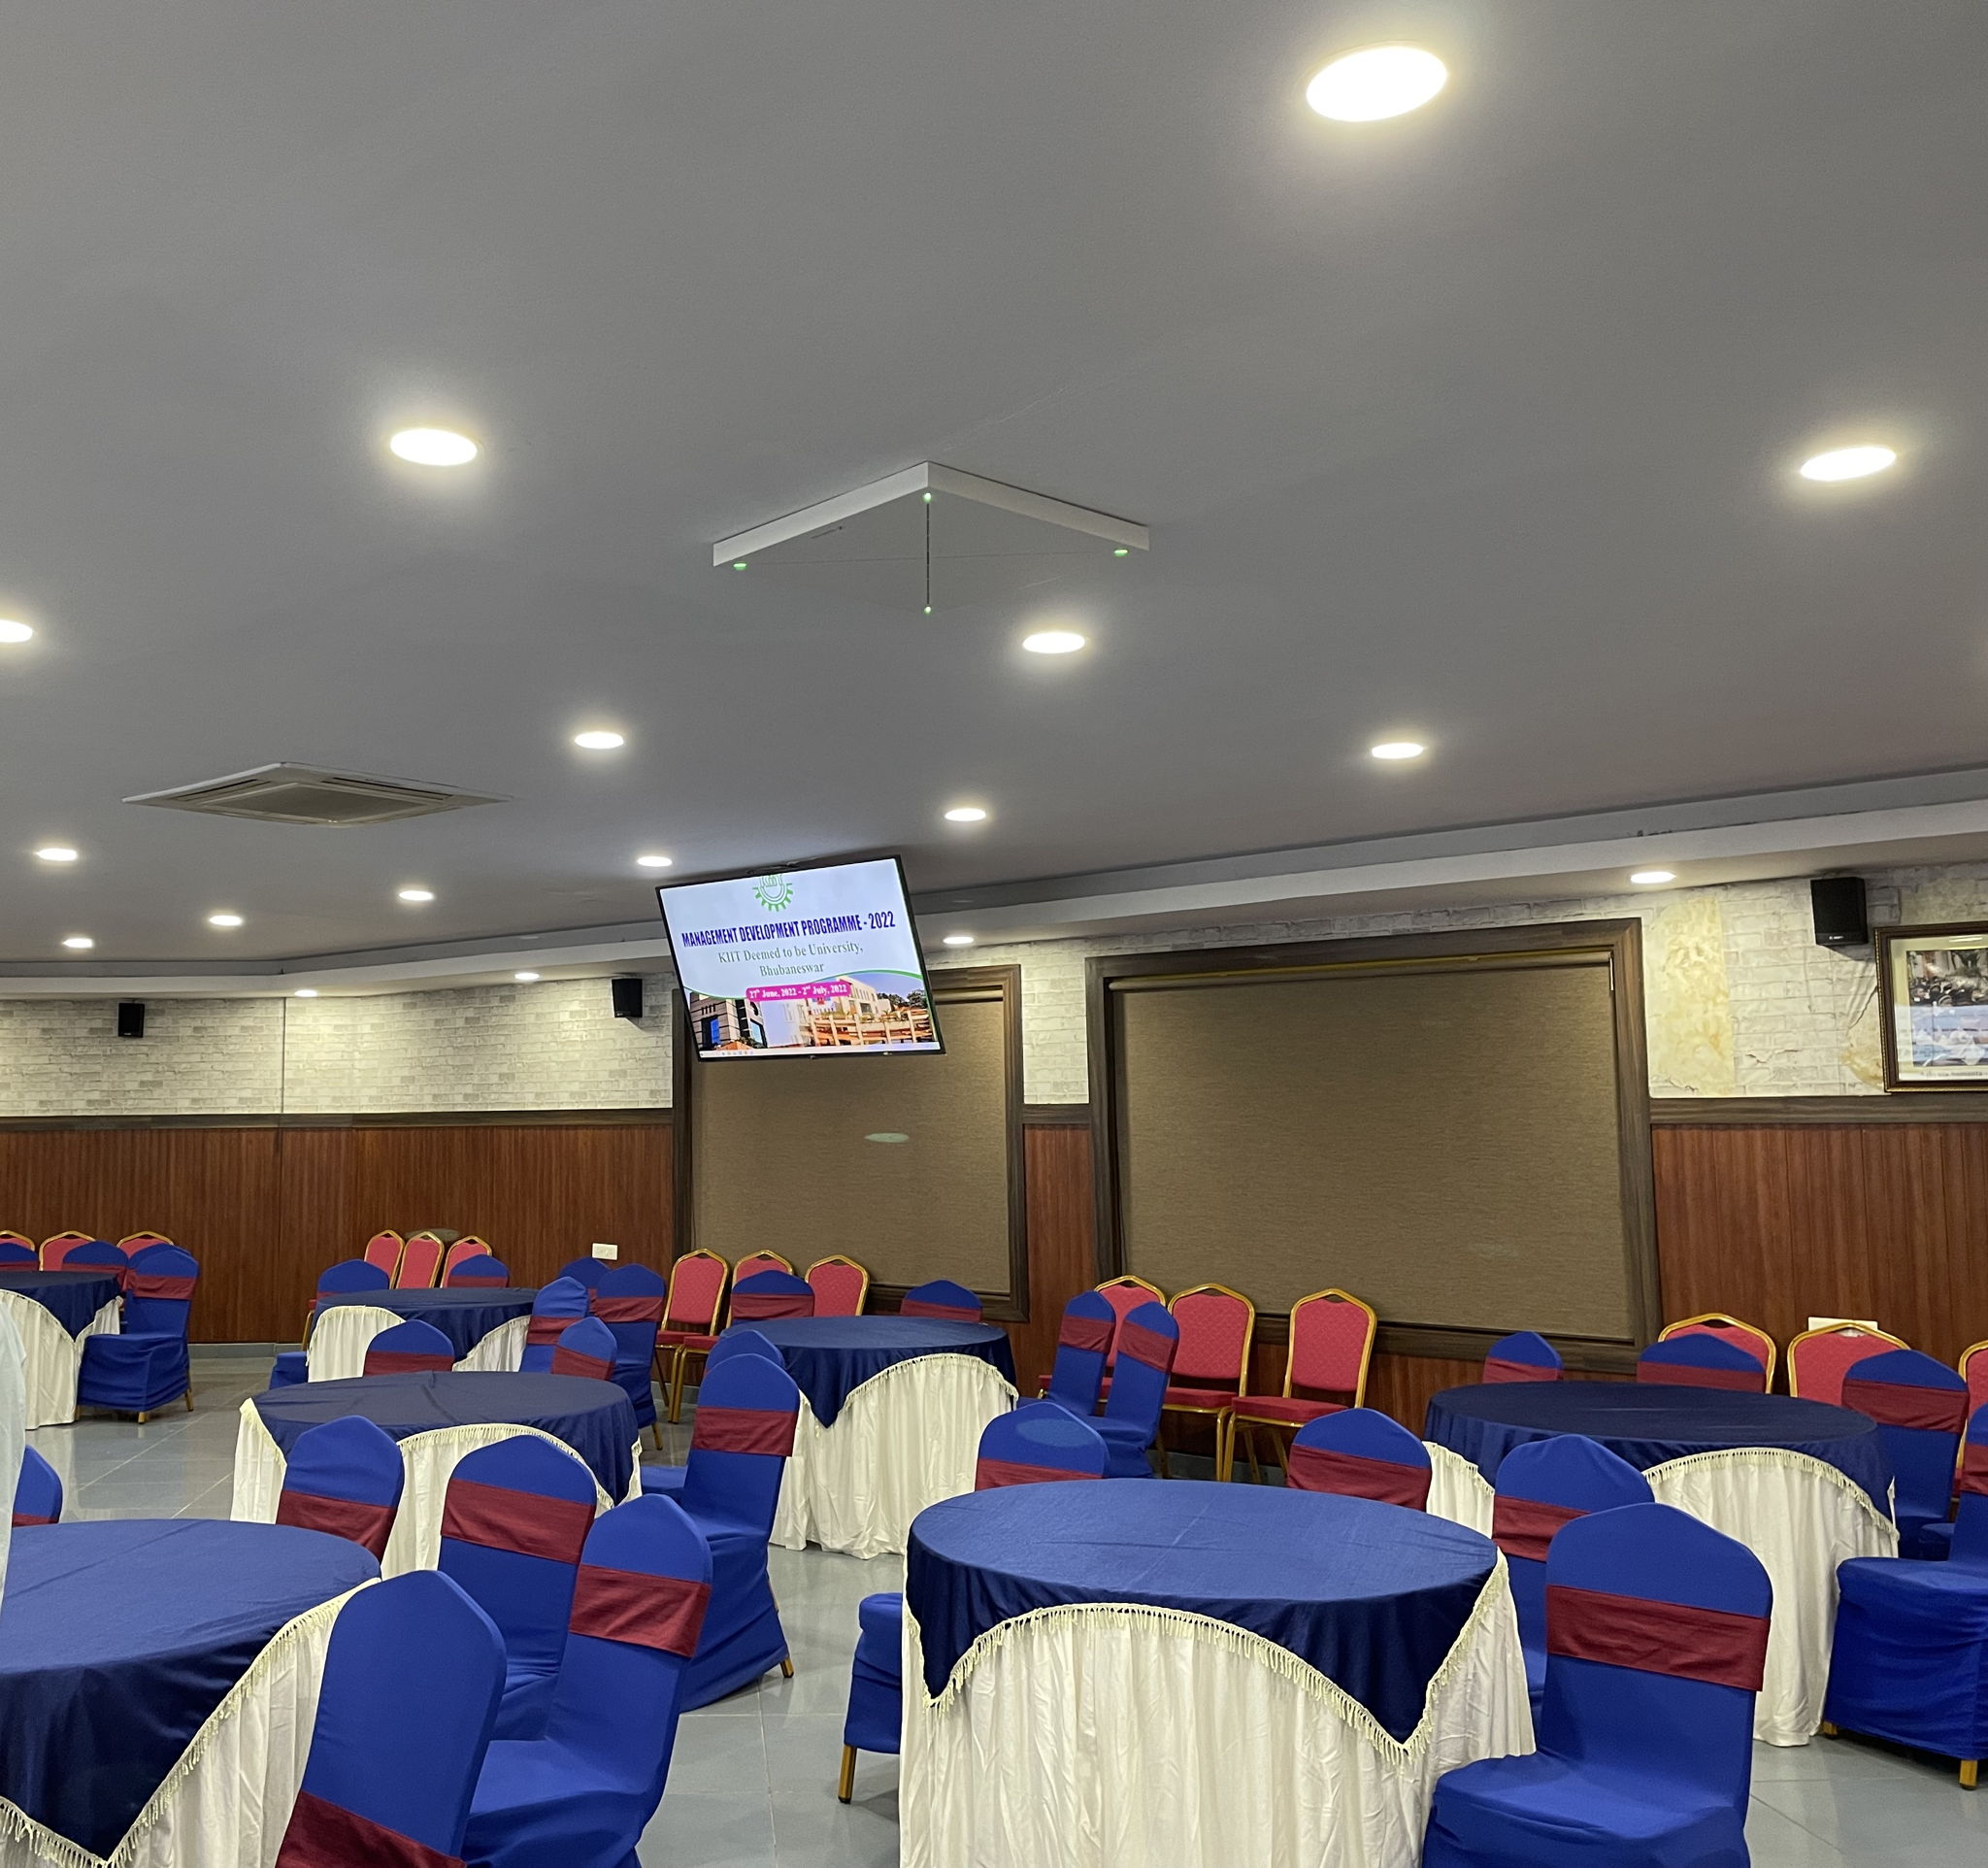 KIIT installed 150 units of Sennheiser TCC 2 to elevate the hybrid learning experience